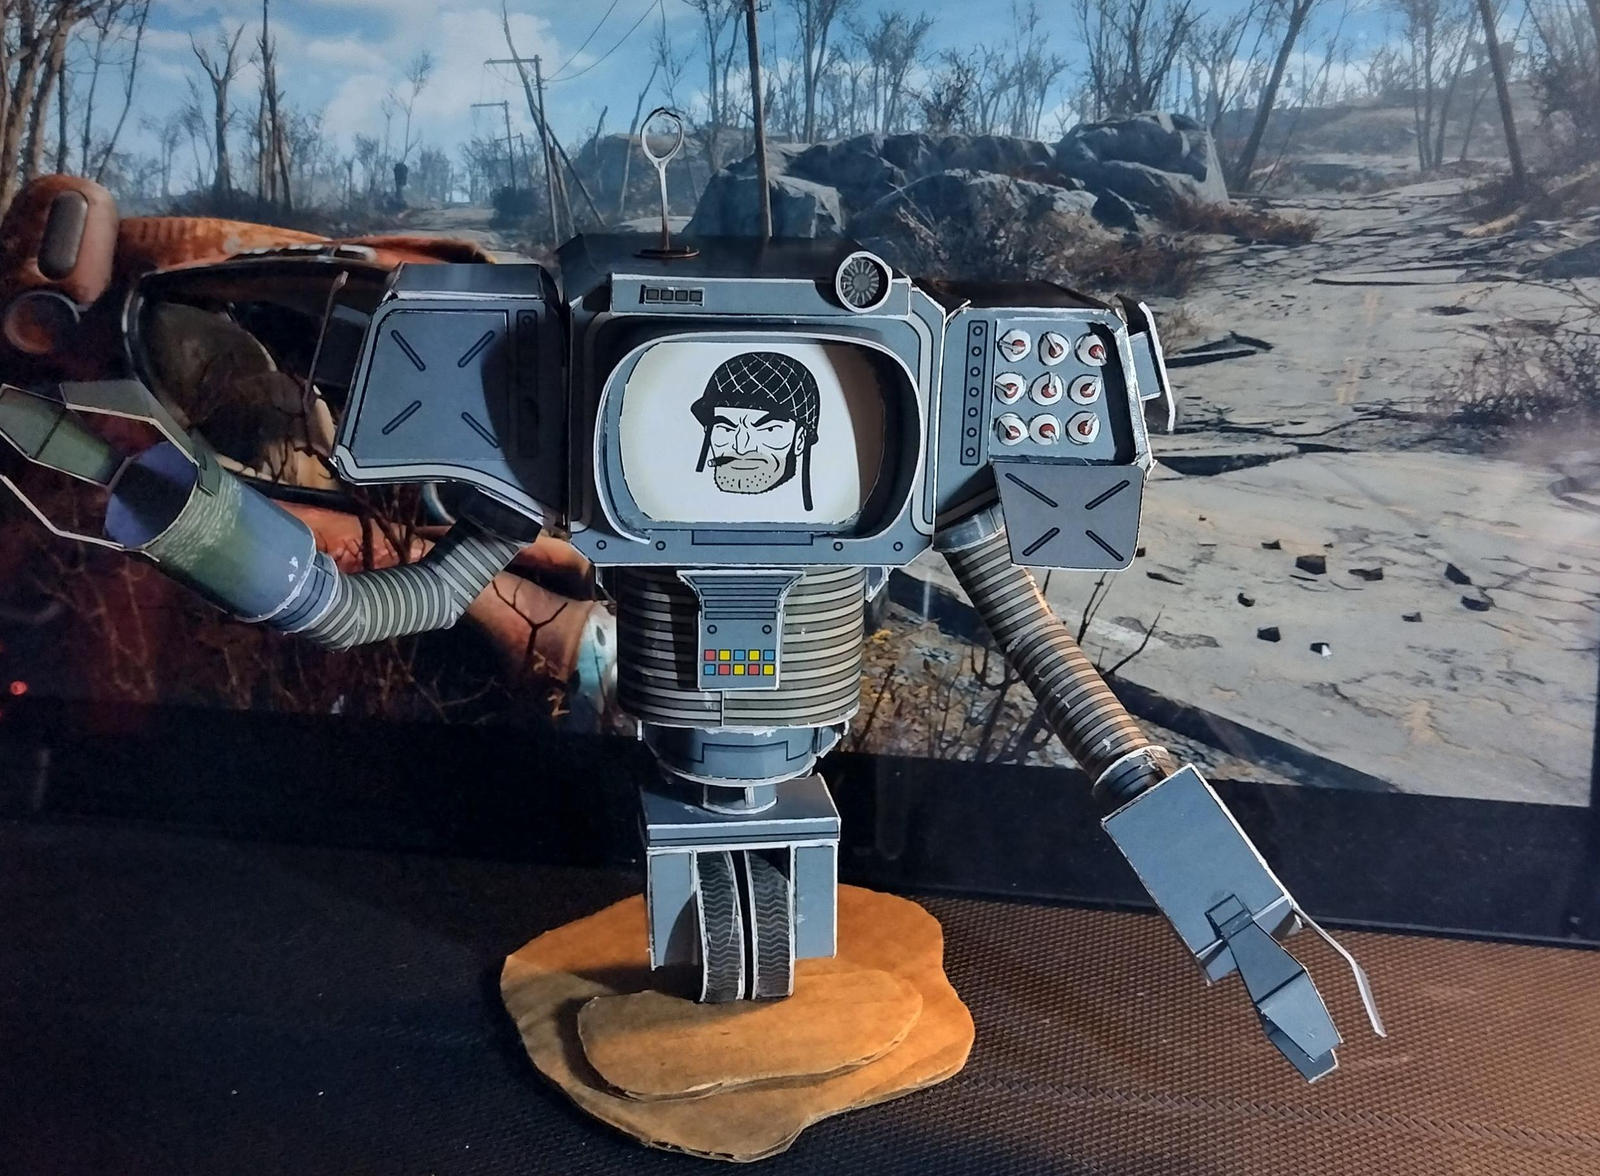 Paper securitron from New Vegas #1 by petrsimcik on DeviantArt